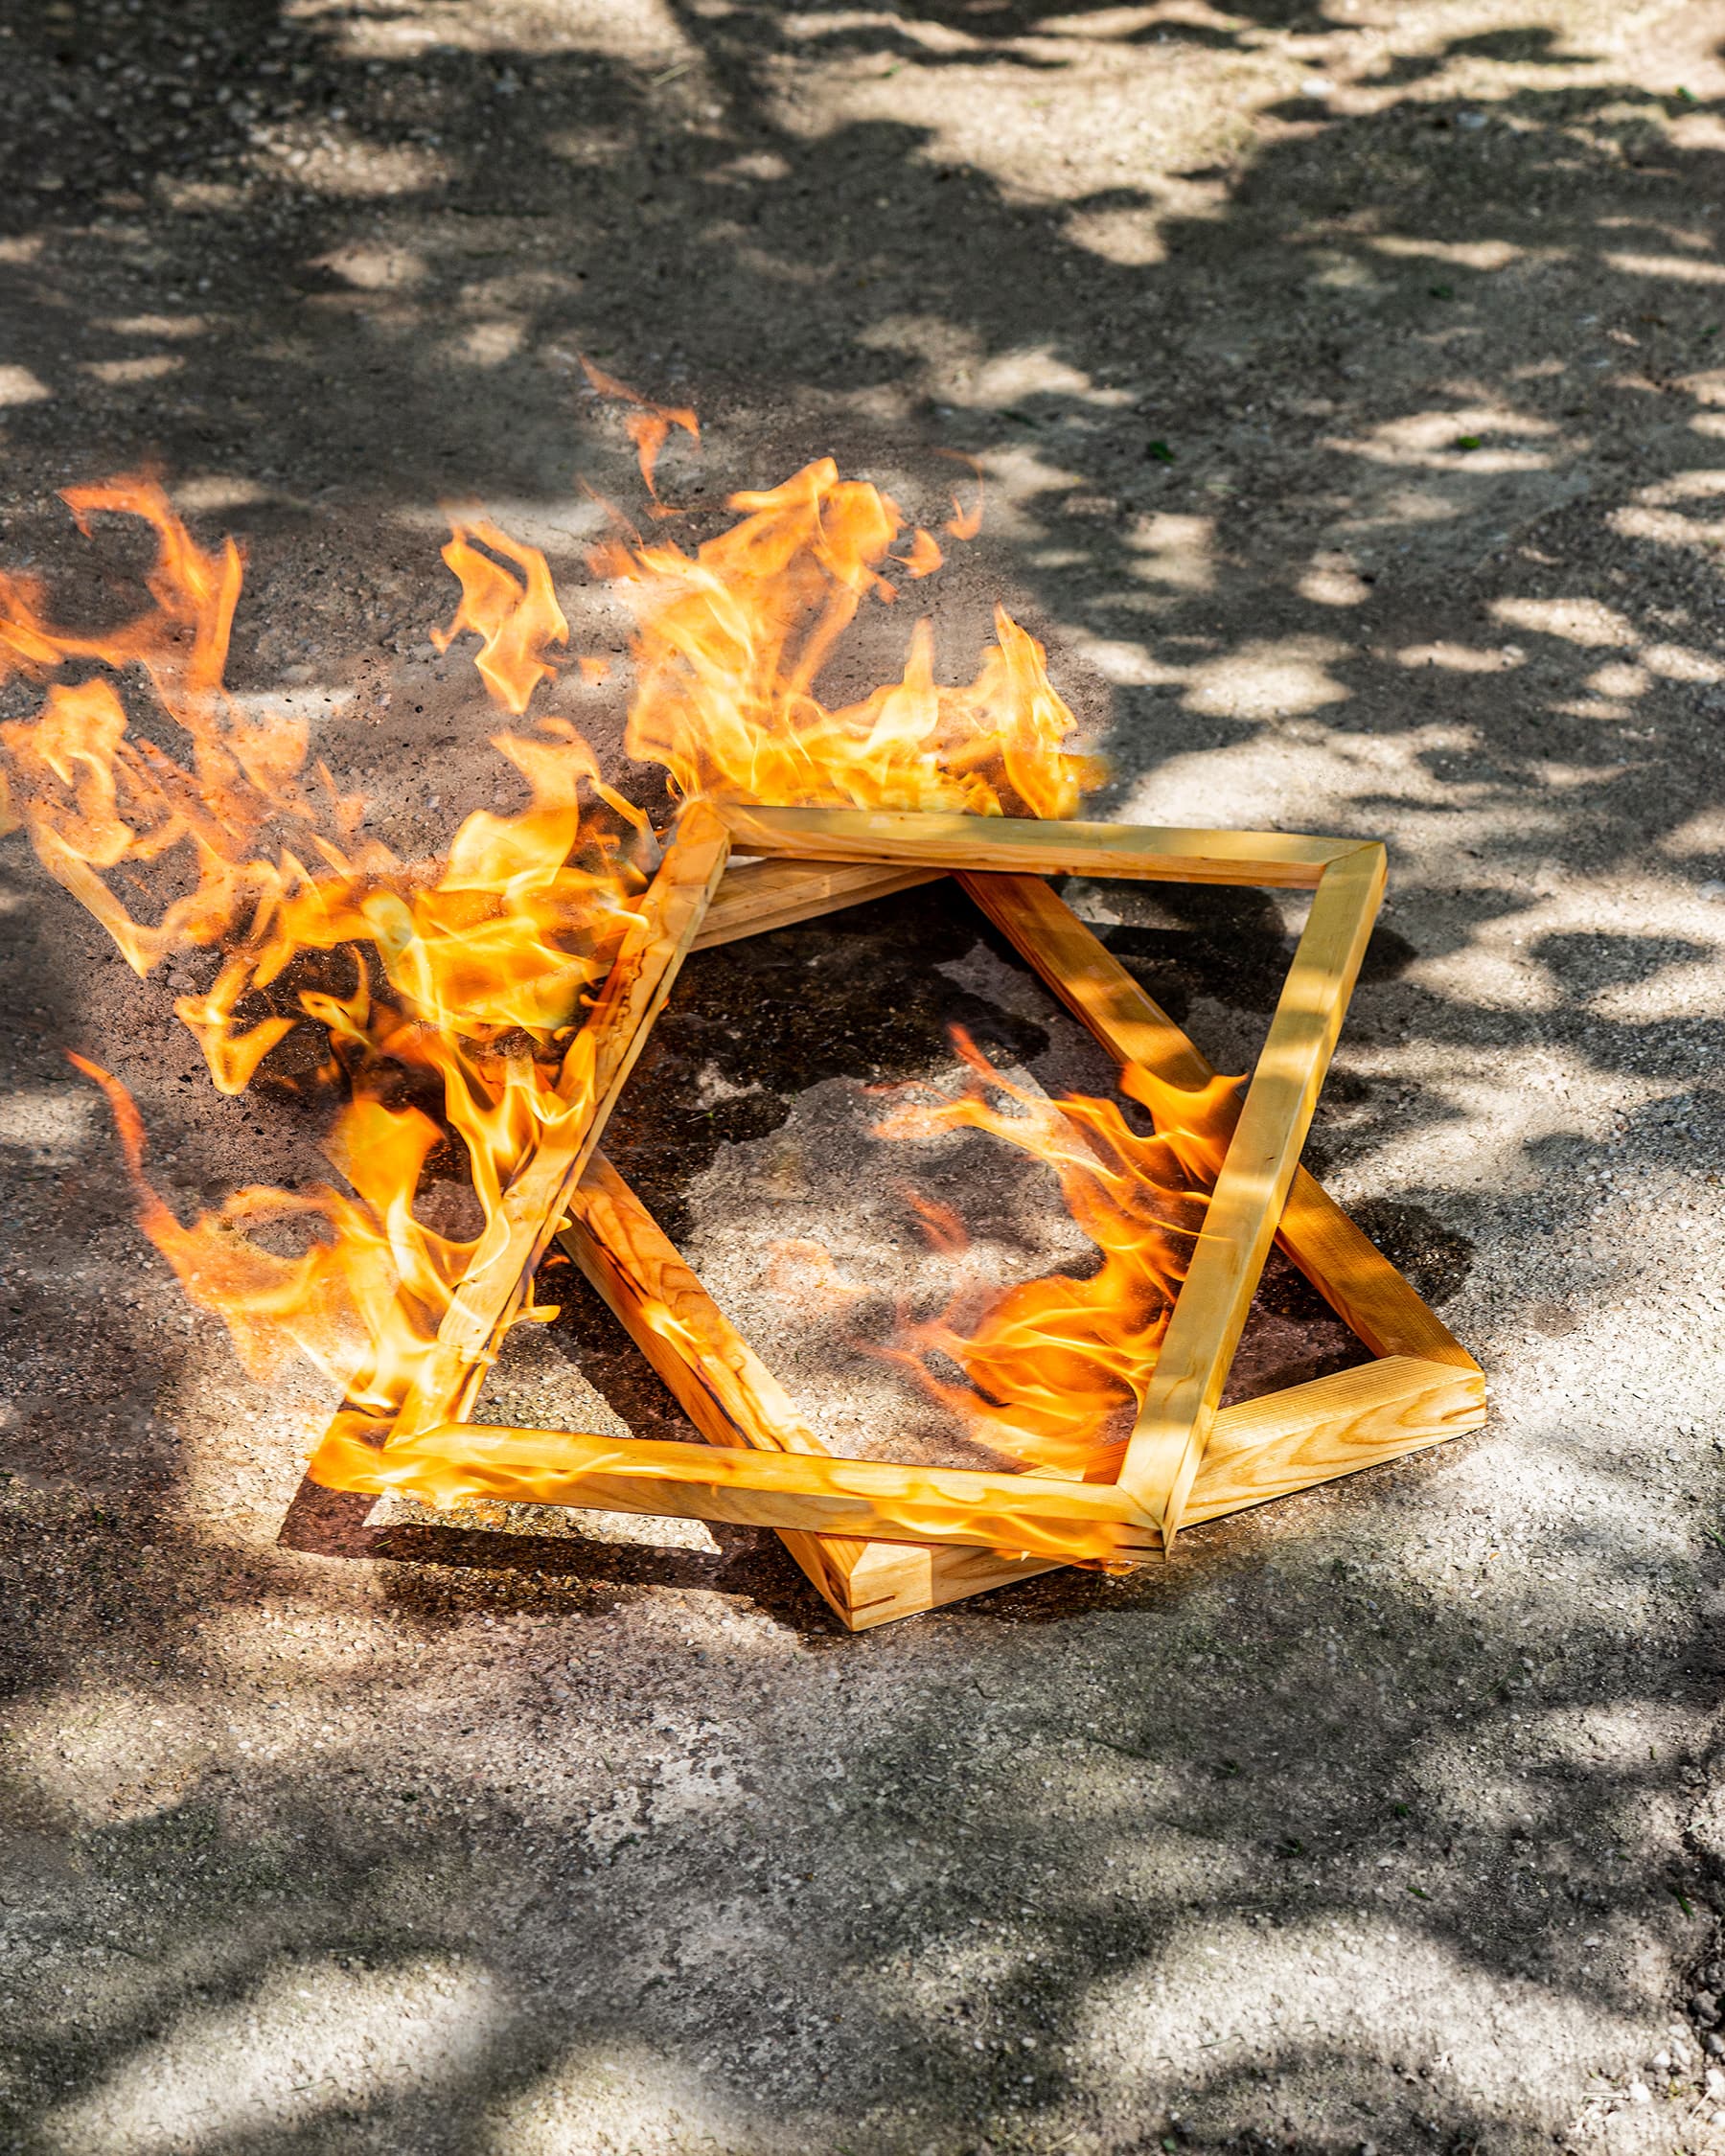 Photograph of frames on fire